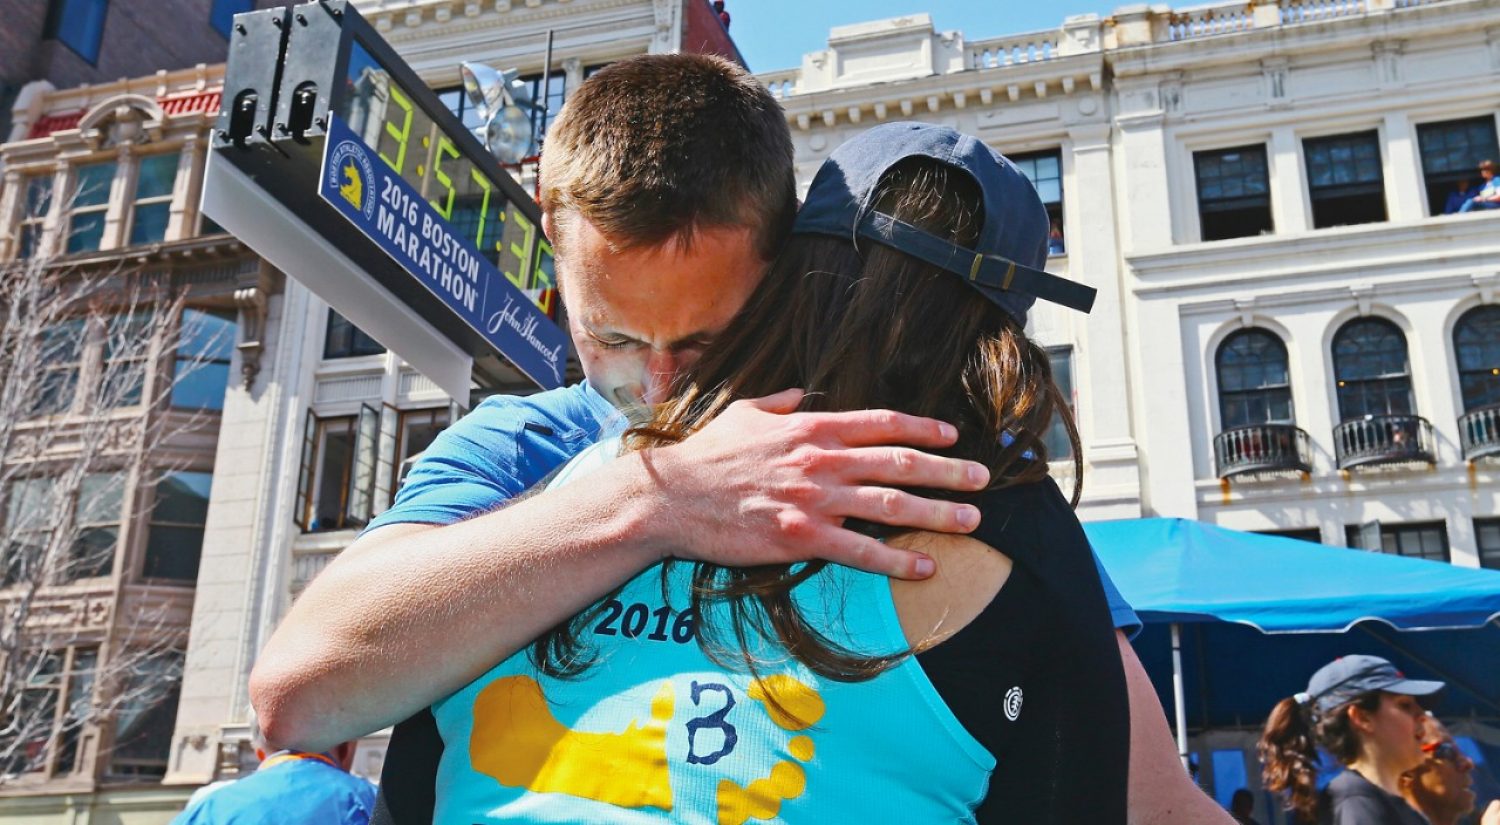 Patrick Downes and Jessica Kensky at the Boston Marathon finish line in 2016 (Maddie Meyer / Getty Images)